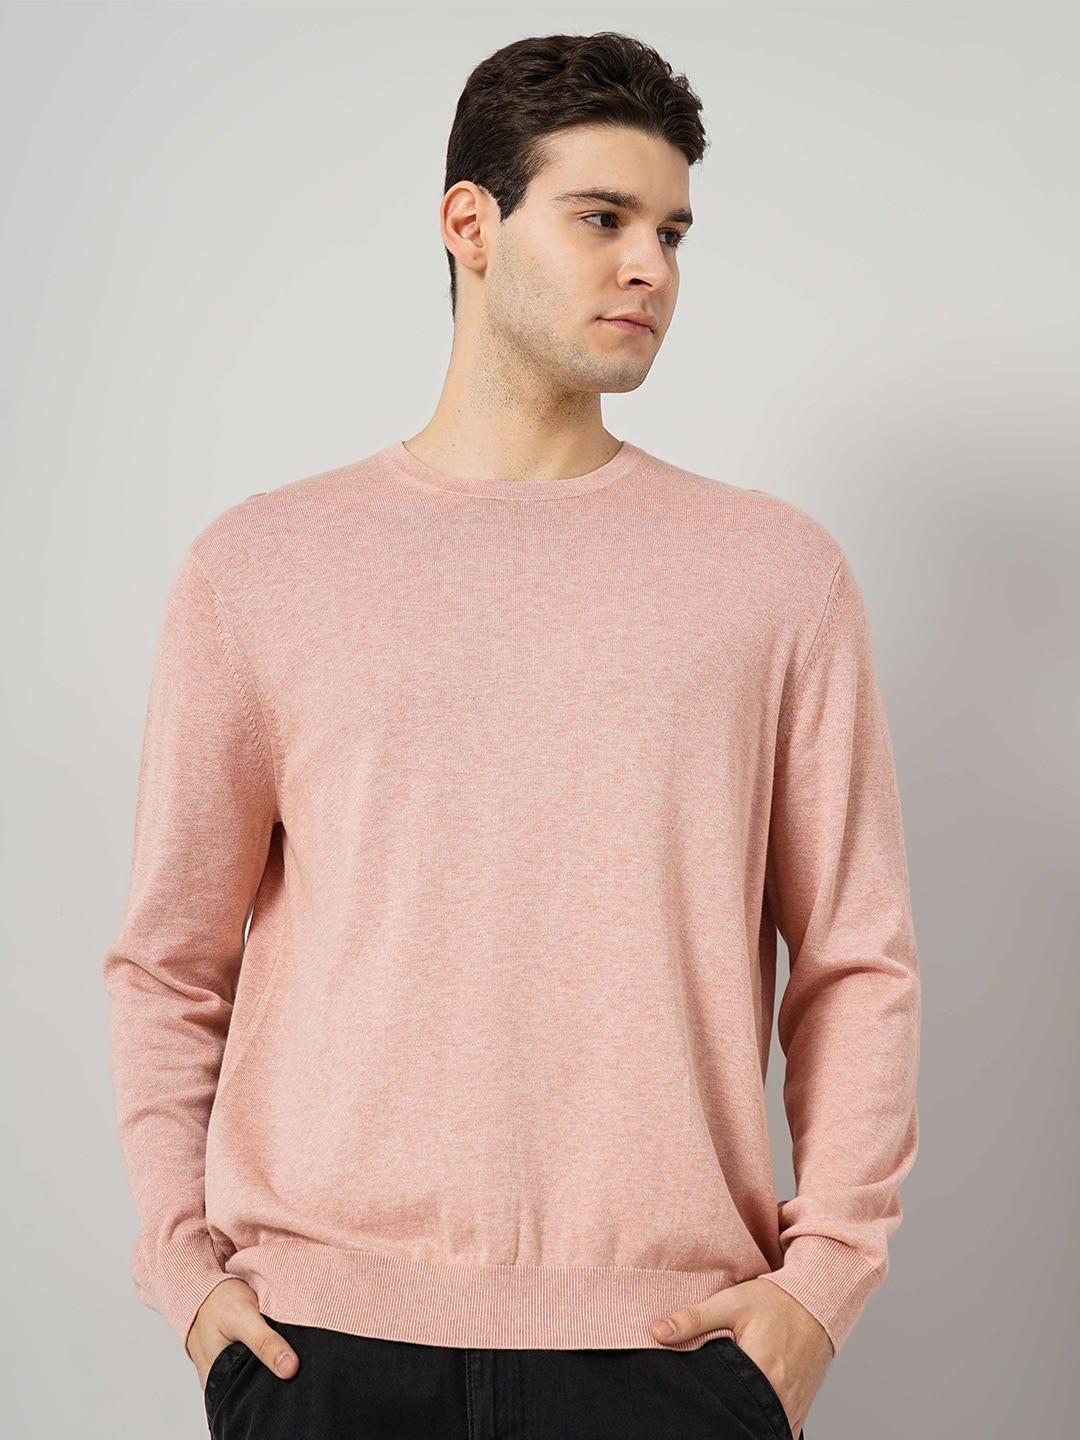 Celio Round Neck Long Sleeves Cotton Pullover Sweater